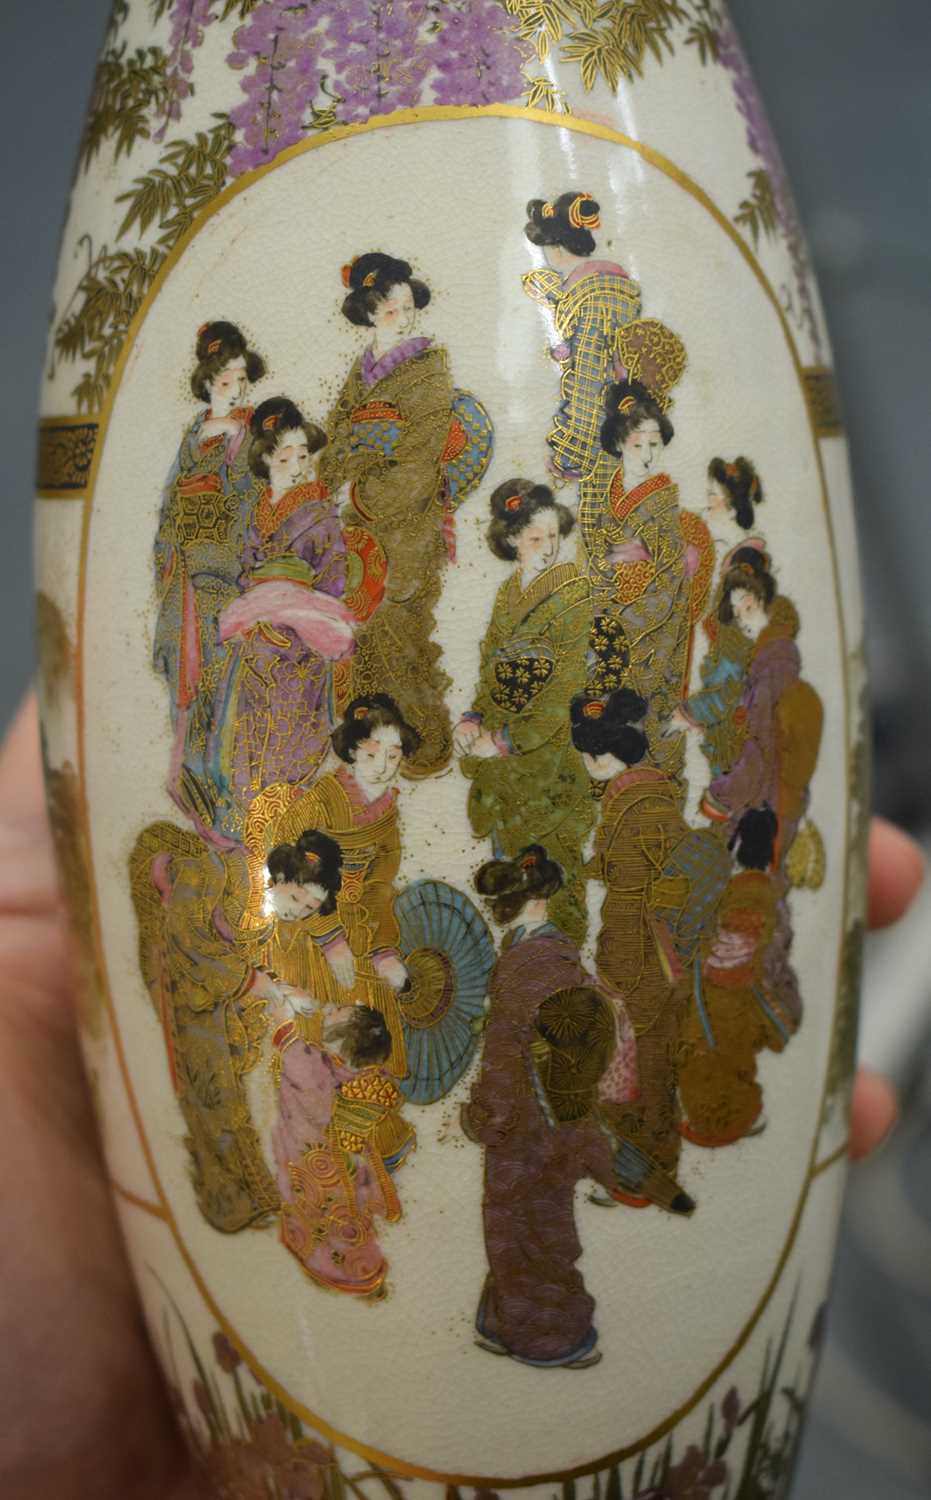 A PAIR OF LATE 19TH CENTURY JAPANESE MEIJI PERIOD SATSUMA POTTERY VASES painted with a group of - Image 20 of 25